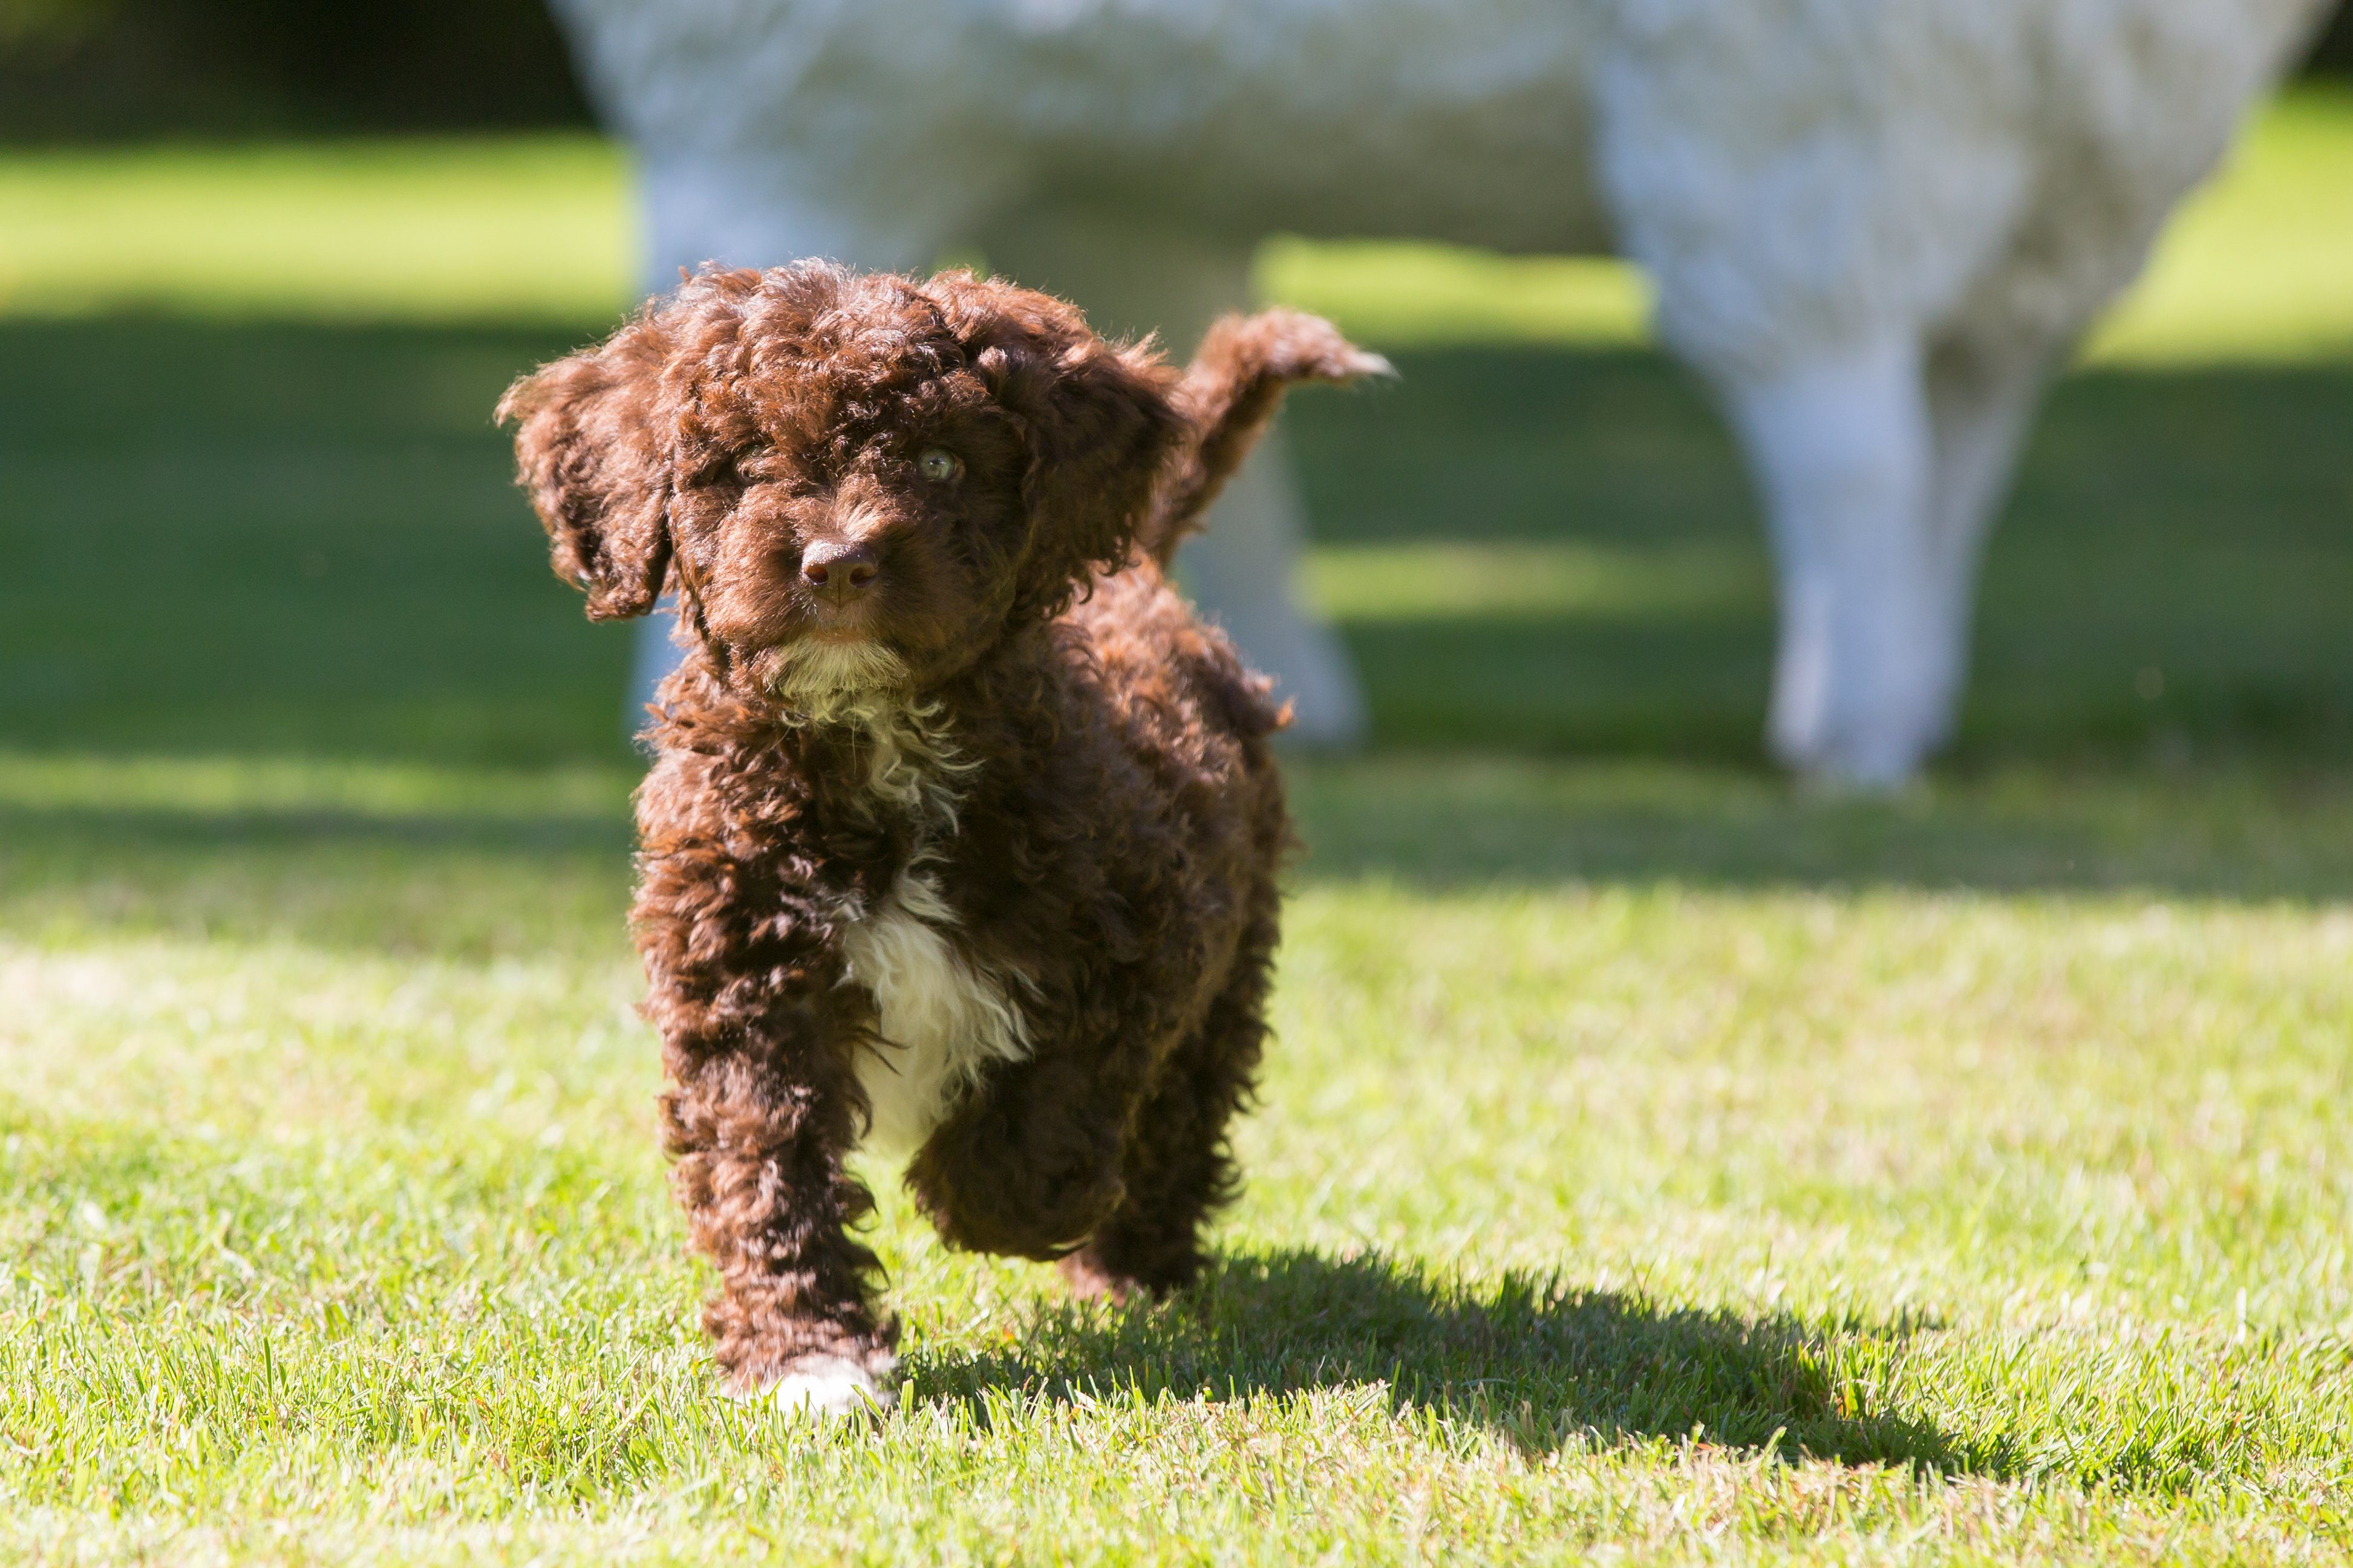 Cute spanish water dog puppy walking on green grass towards the camera in a garden